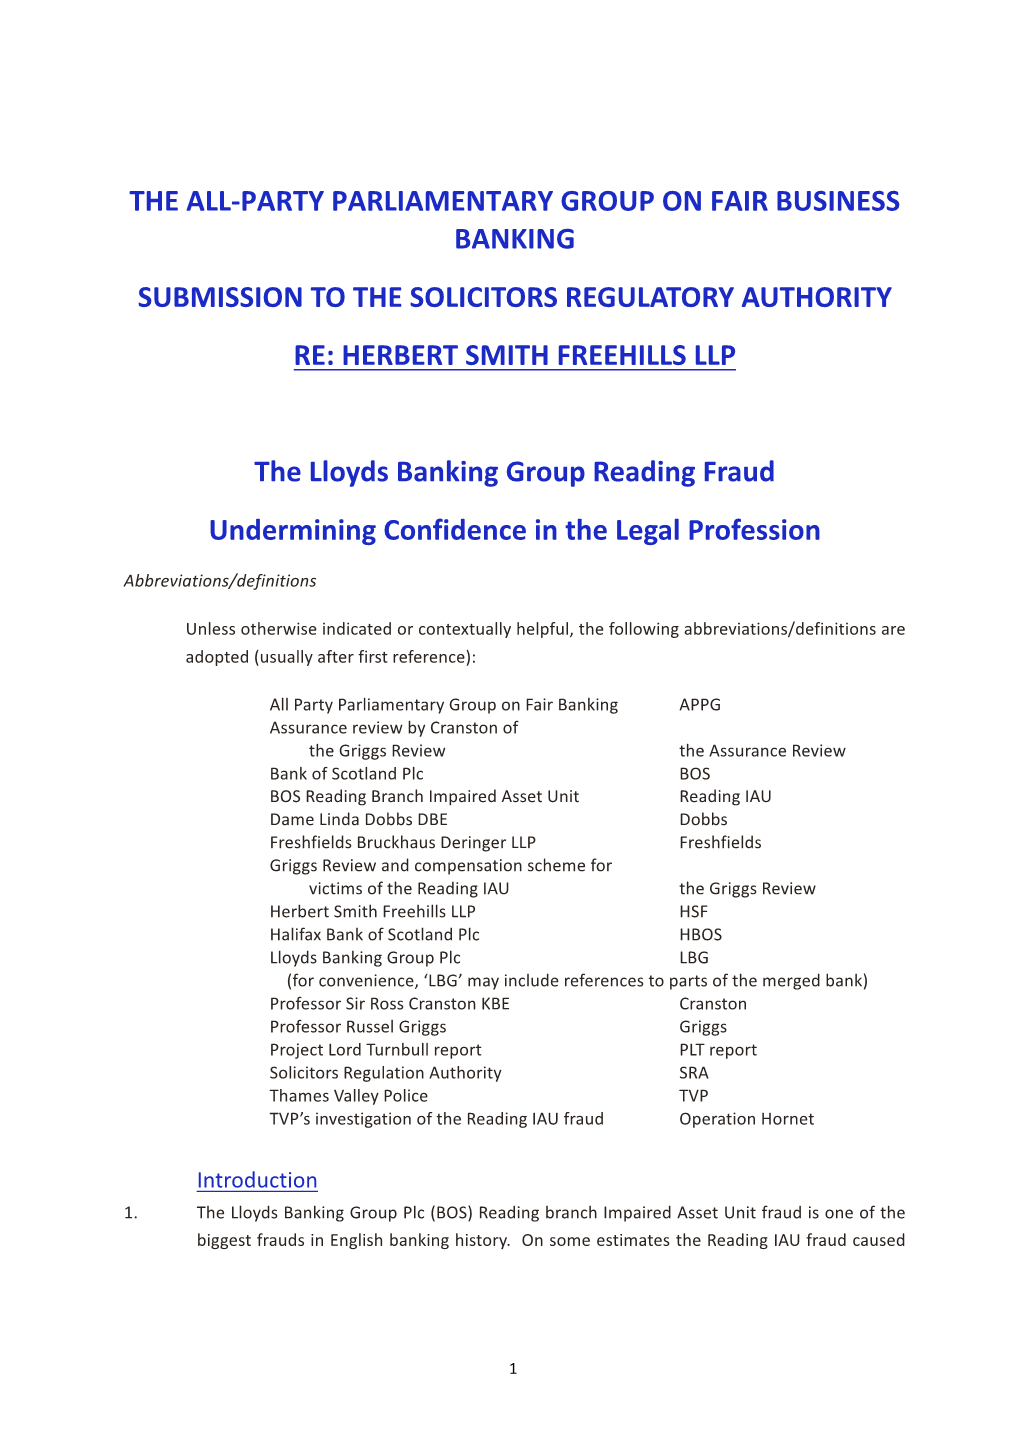 The All-Party Parliamentary Group on Fair Business Banking Submission to the Solicitors Regulatory Authority Re: Herbert Smith Freehills Llp